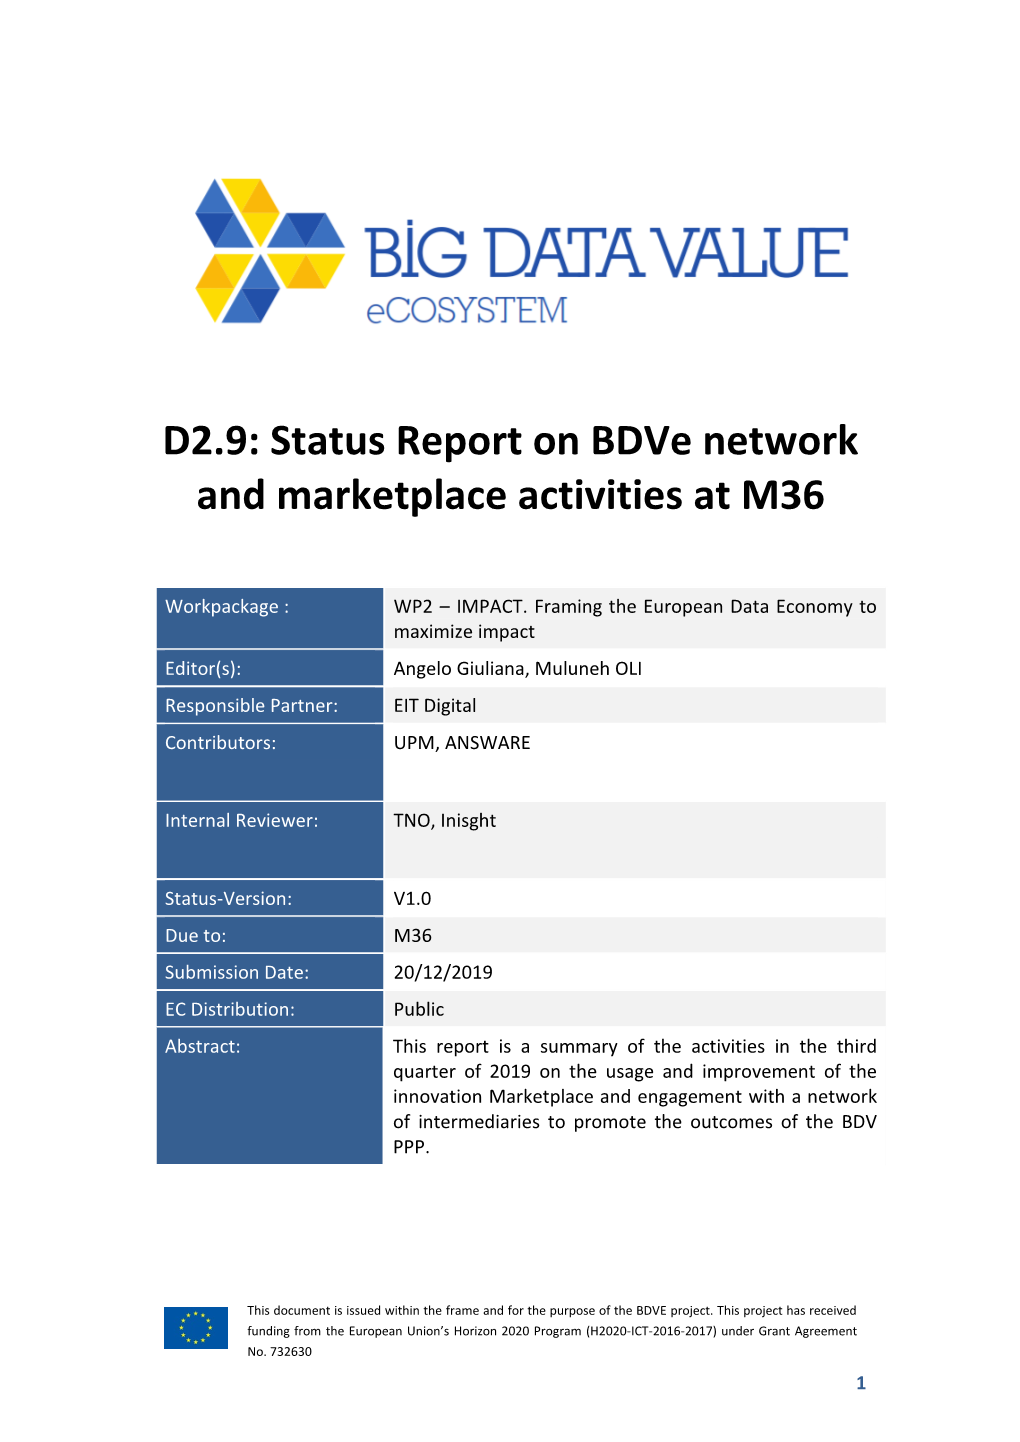 D2.9: Status Report on Bdve Network and Marketplace Activities at M36